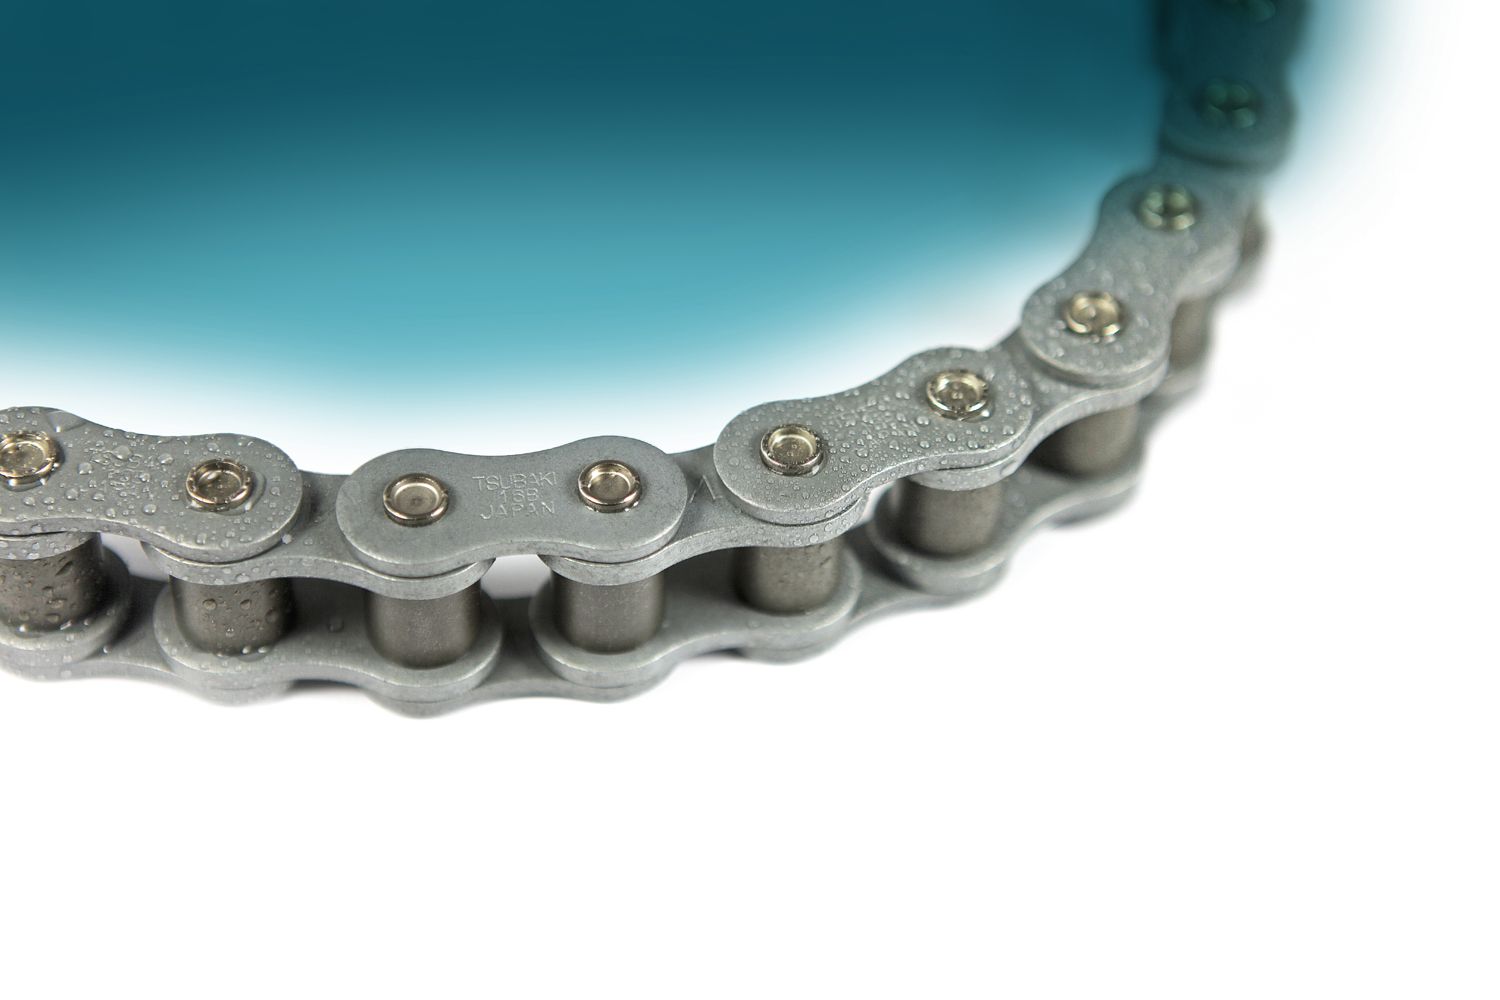 Tsubaki’s Neptune chain is a standard BS chain that has undergone a special surface treatment process. The link plates, bushes, rollers and pins of the chain have a special coating applied in order to provide the maximum protection.